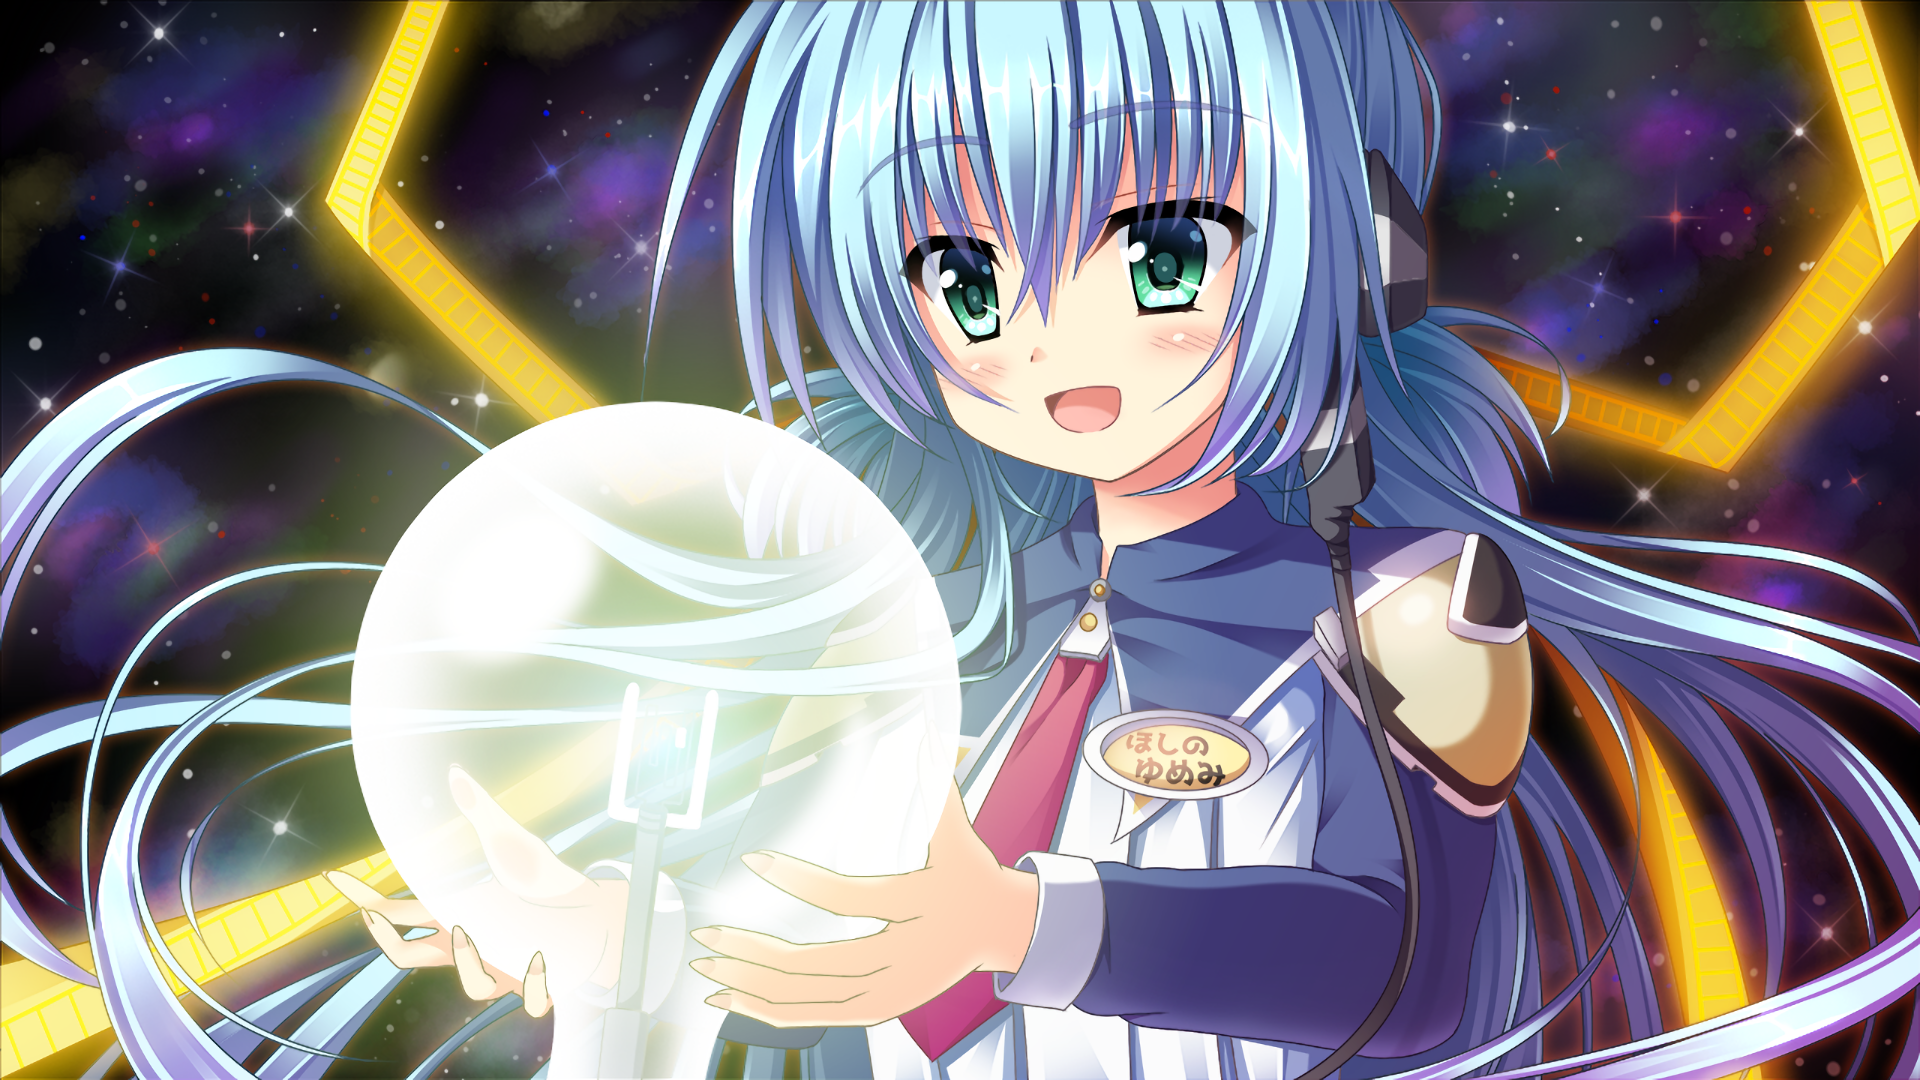 Planetarian The Reverie Of A Little Planet Wallpapers Anime Hq Planetarian The Reverie Of A Little Planet Pictures 4k Wallpapers 19